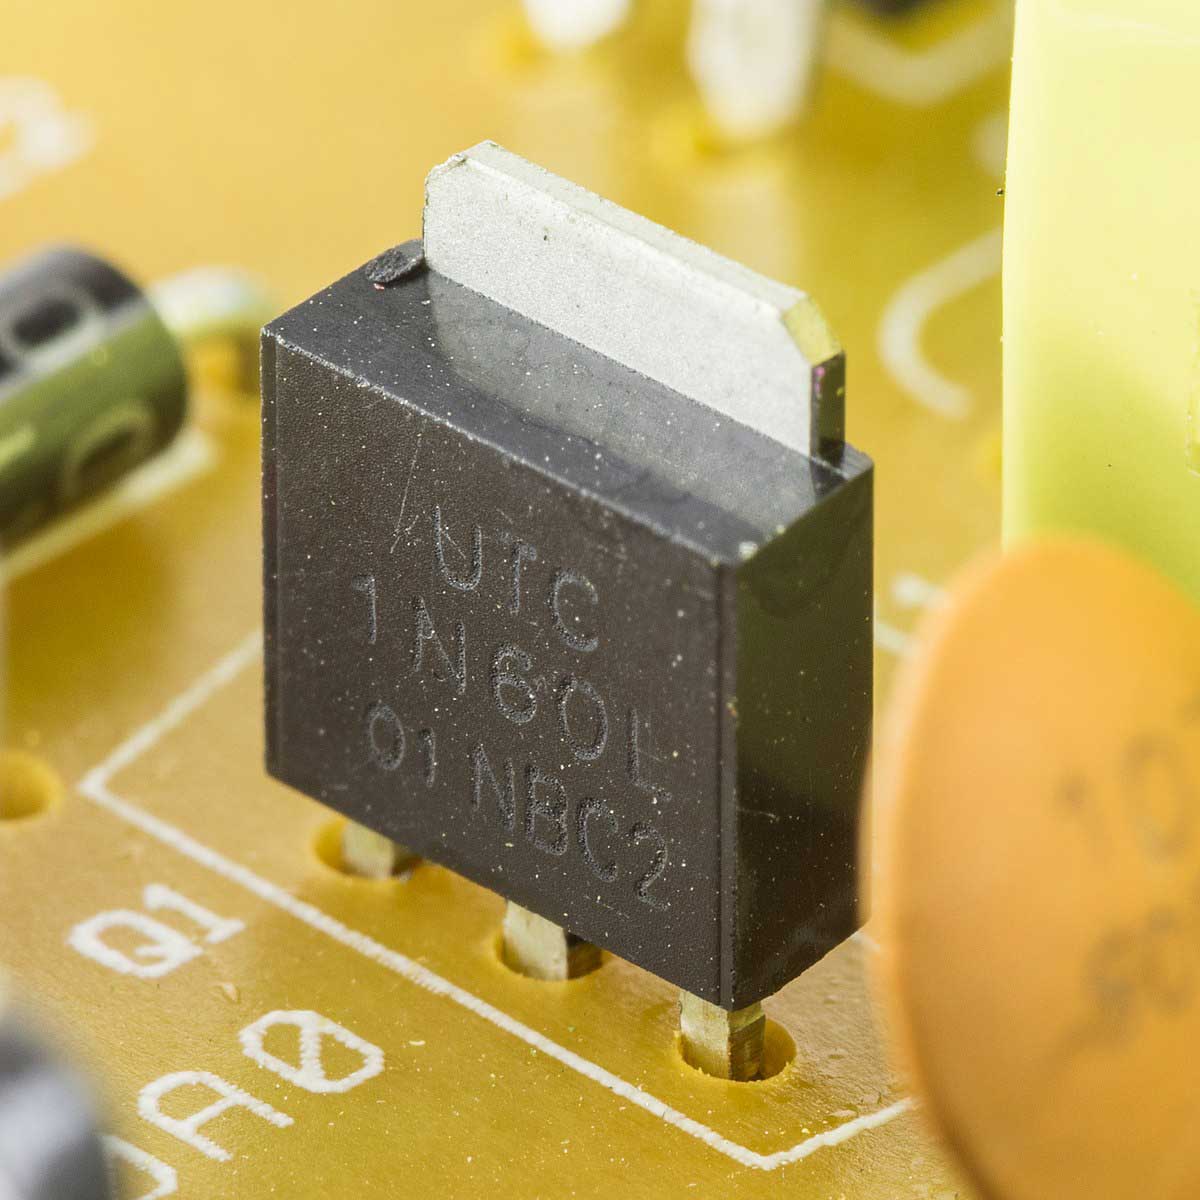 An N-channel power MOSFET